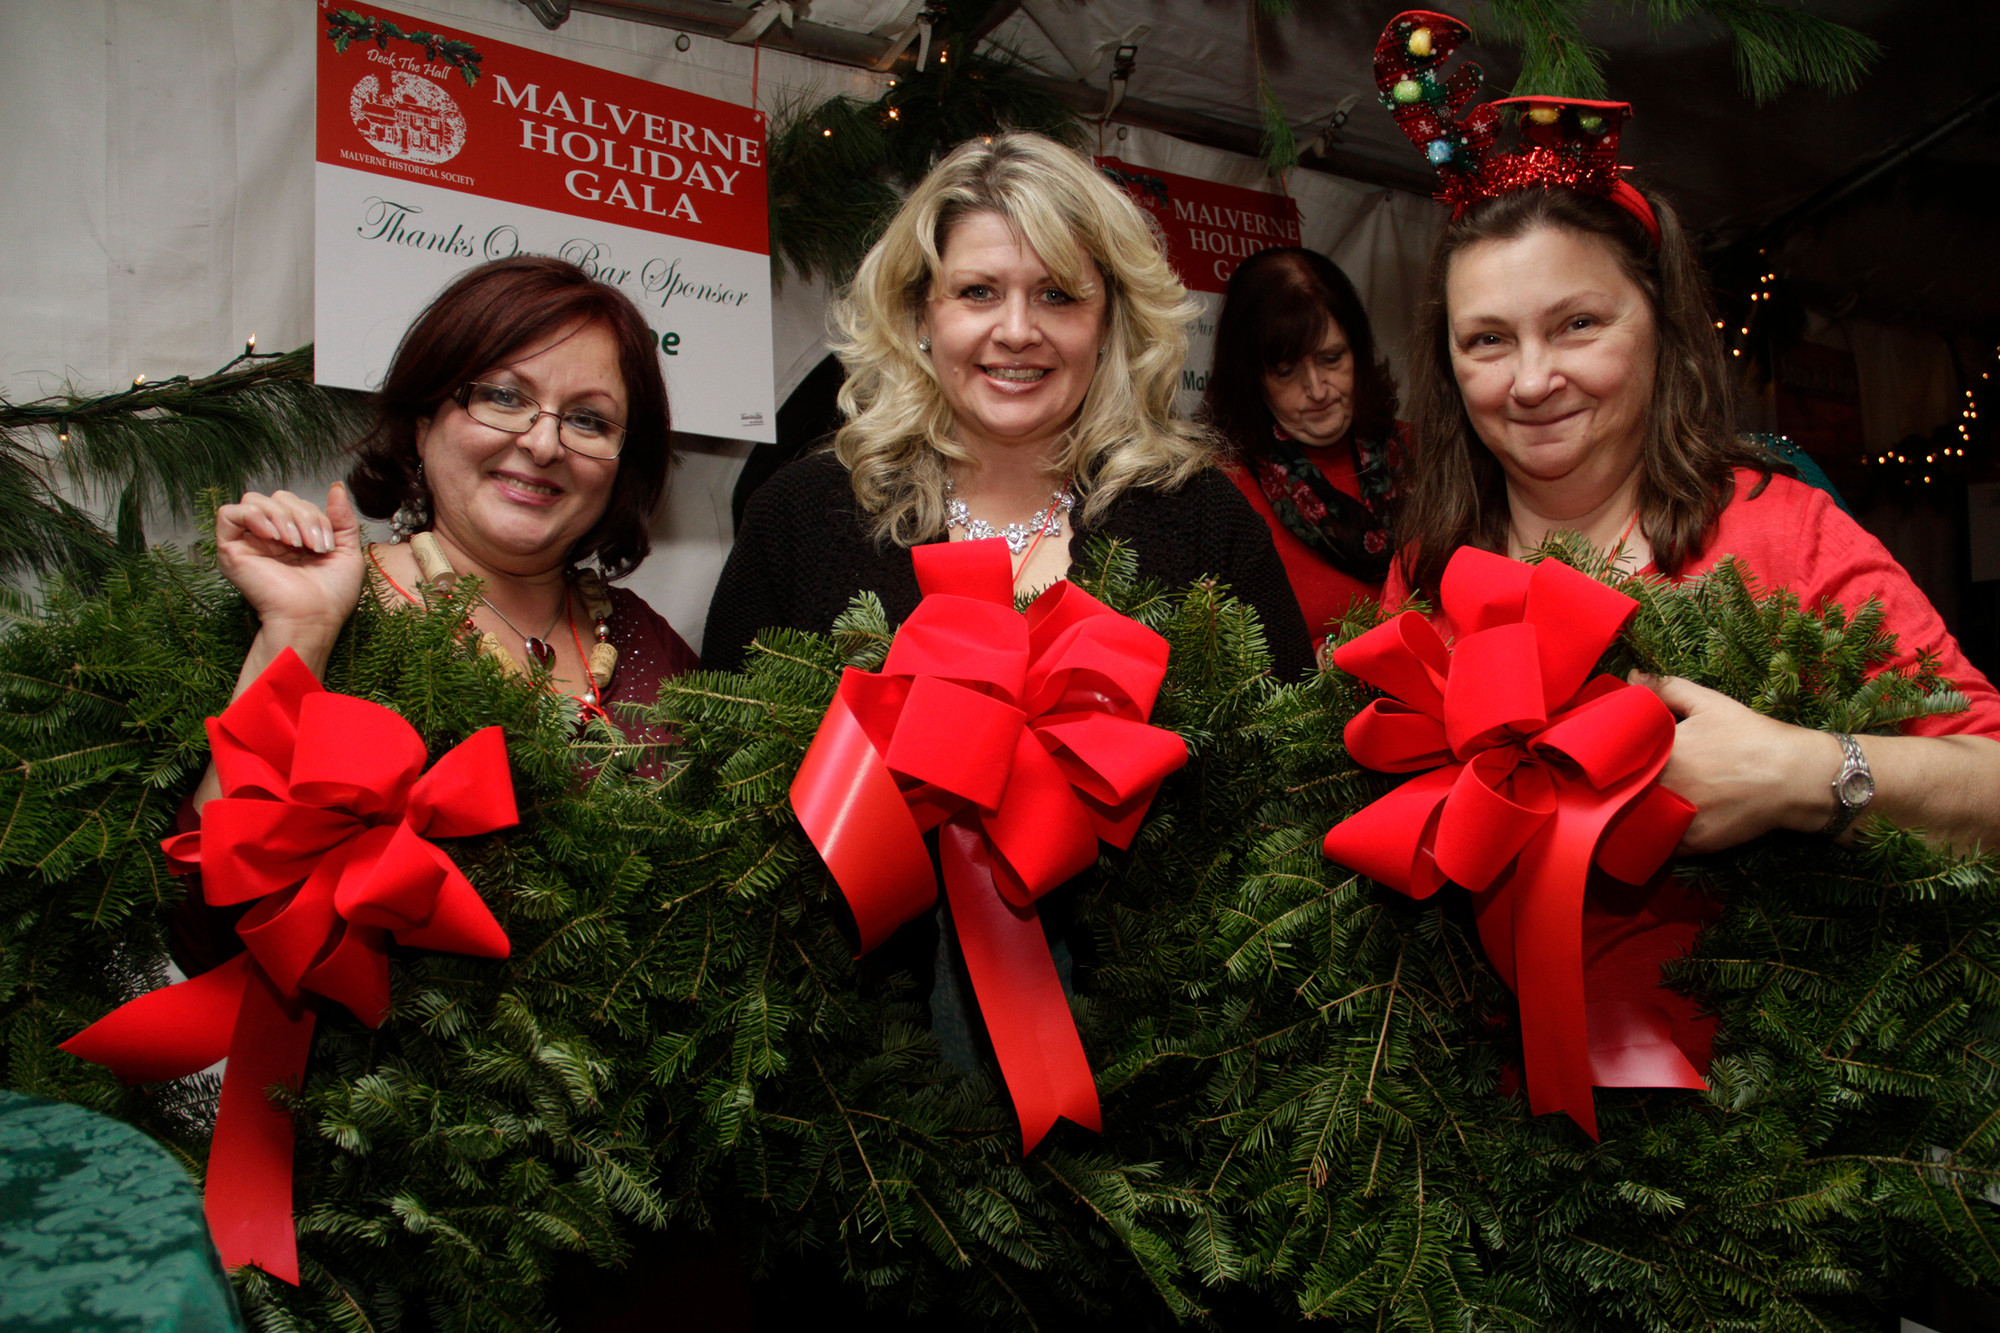 Liz Berger, Alison Lorch and Laurie Lerner, winners of a holiday wreath door prize at the Malverne Historical Society's Holiday Gala.